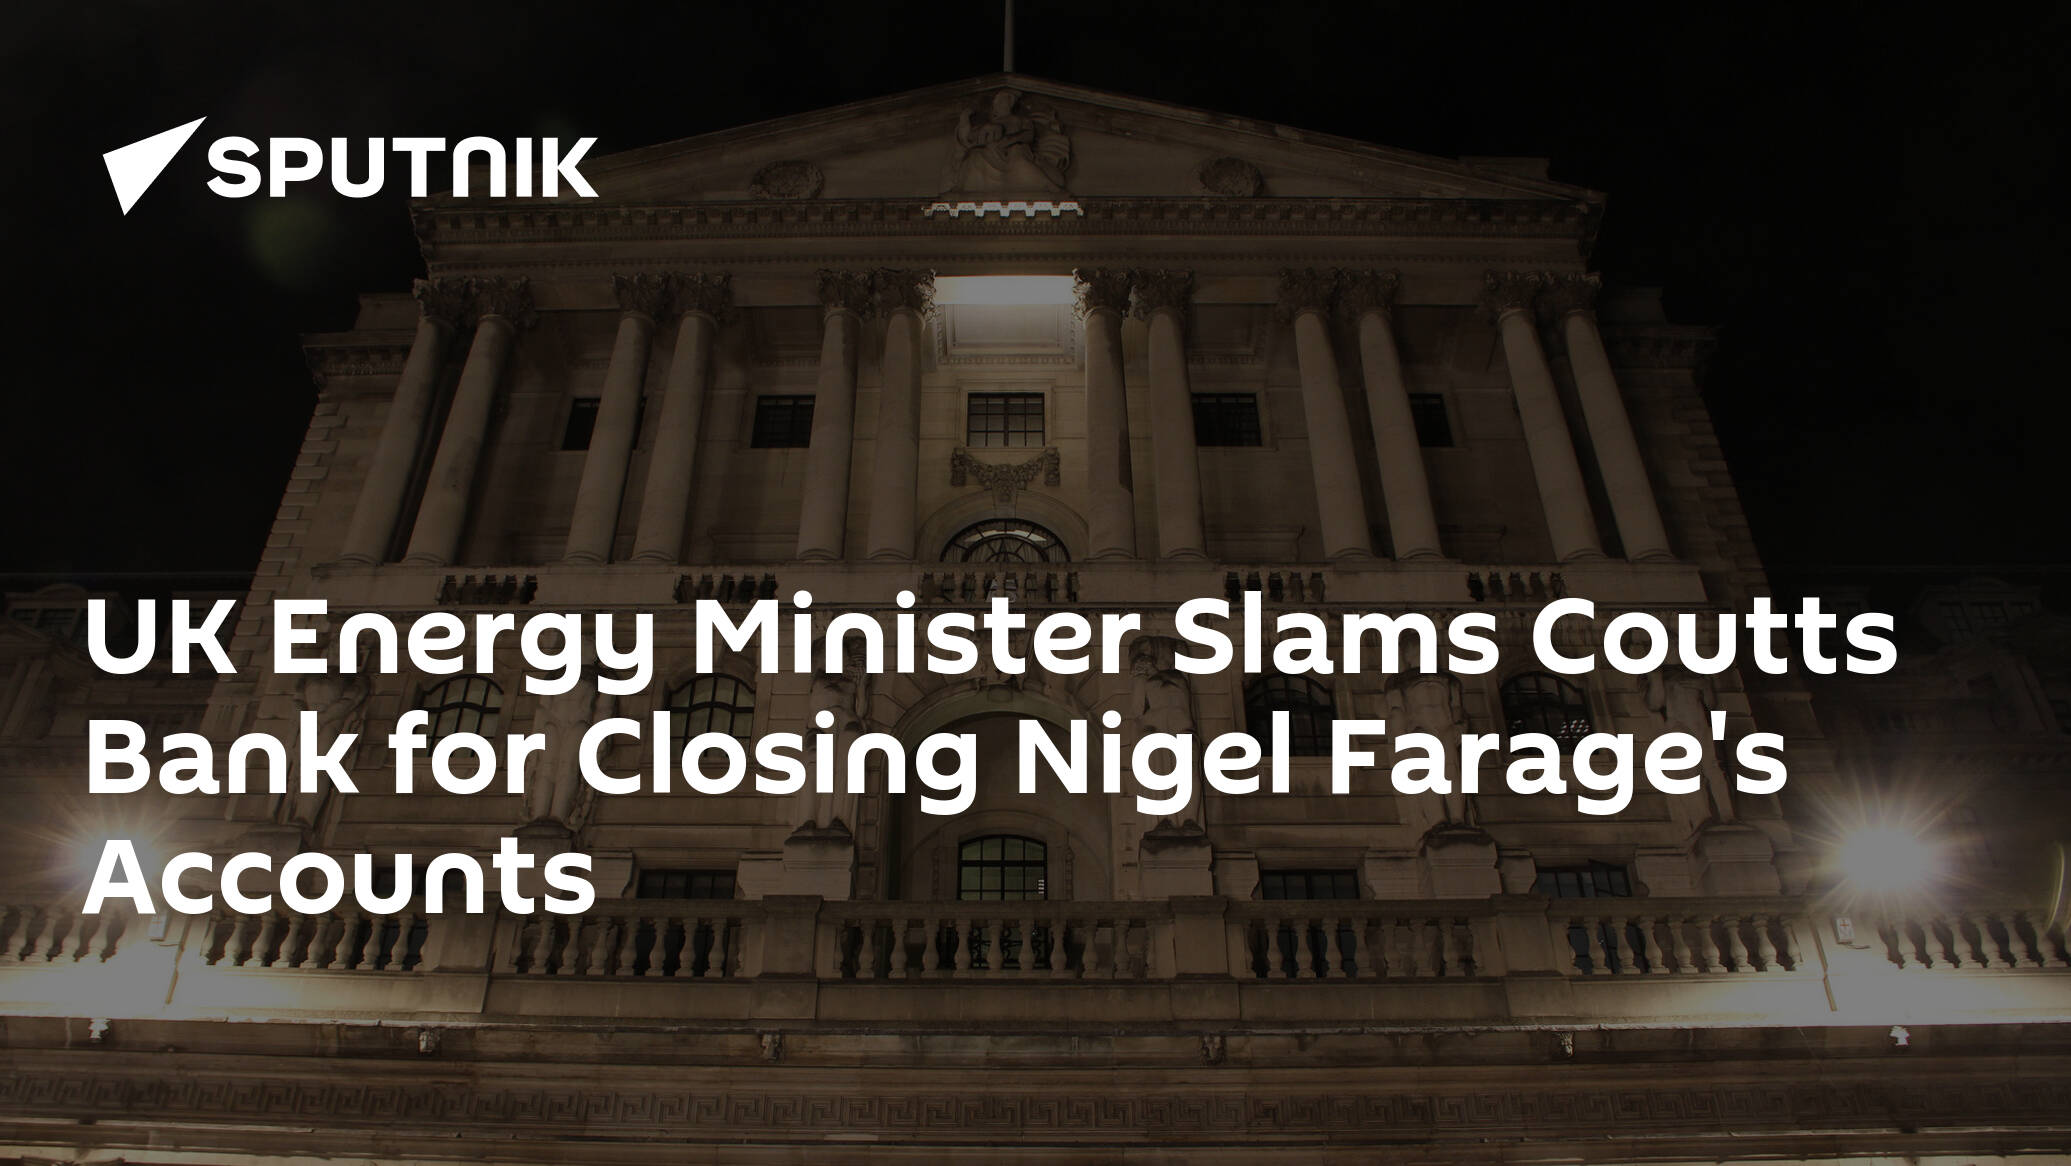 UK Energy Minister Slams Coutts Bank for Closing Nigel Farage's Accounts